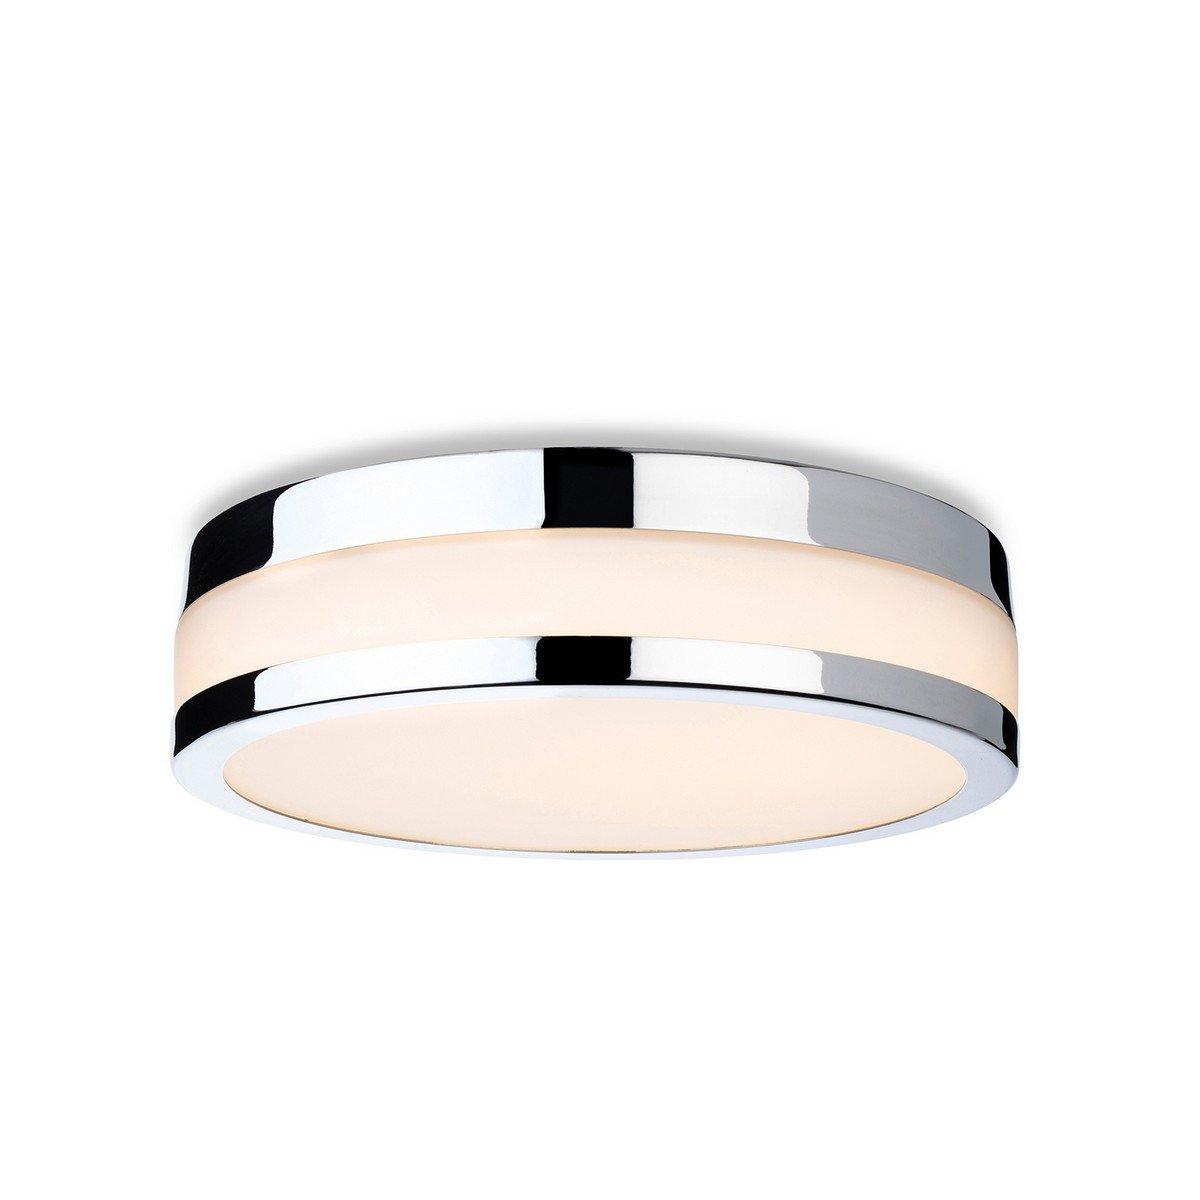 Marnie 220cm LED Flush Ceiling Fitting Chrome with Opal White Glass IP44